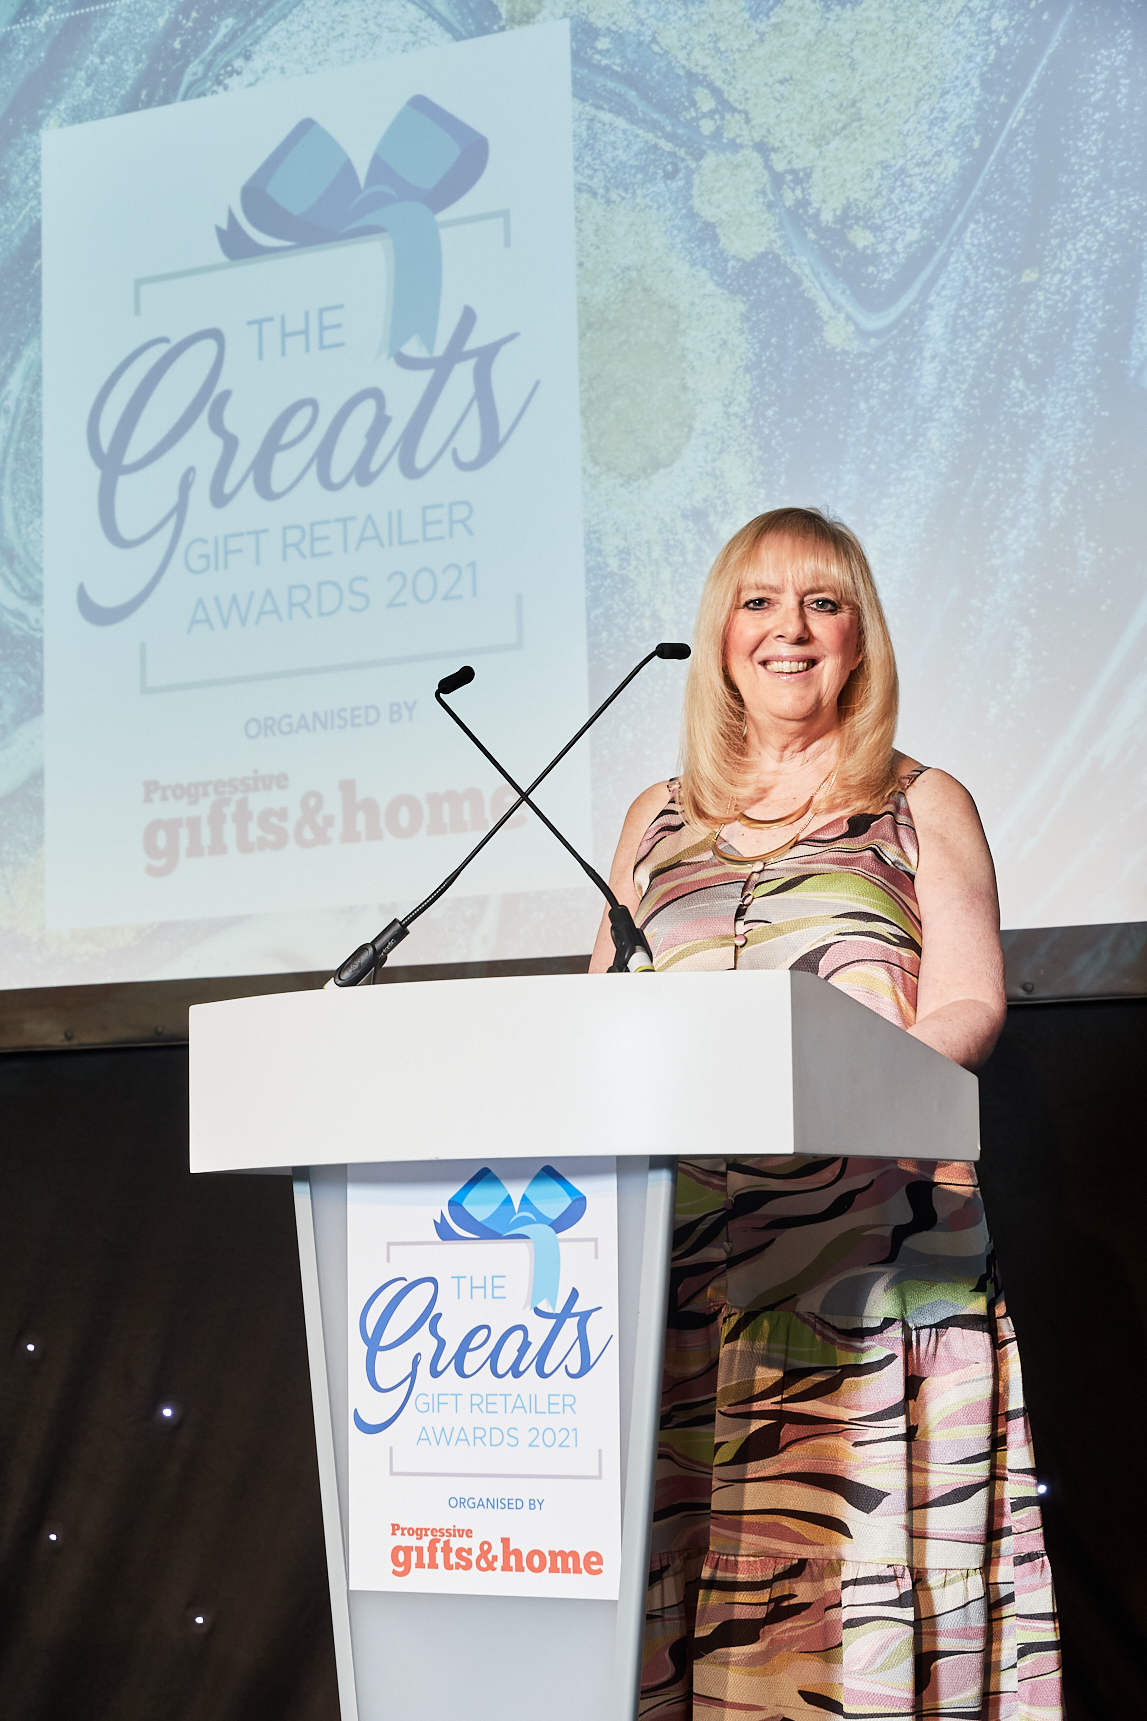 Above: Progressive Gifts & Home’s editor Sue Marks welcomed guests to The Greats Awards 2021 in September.